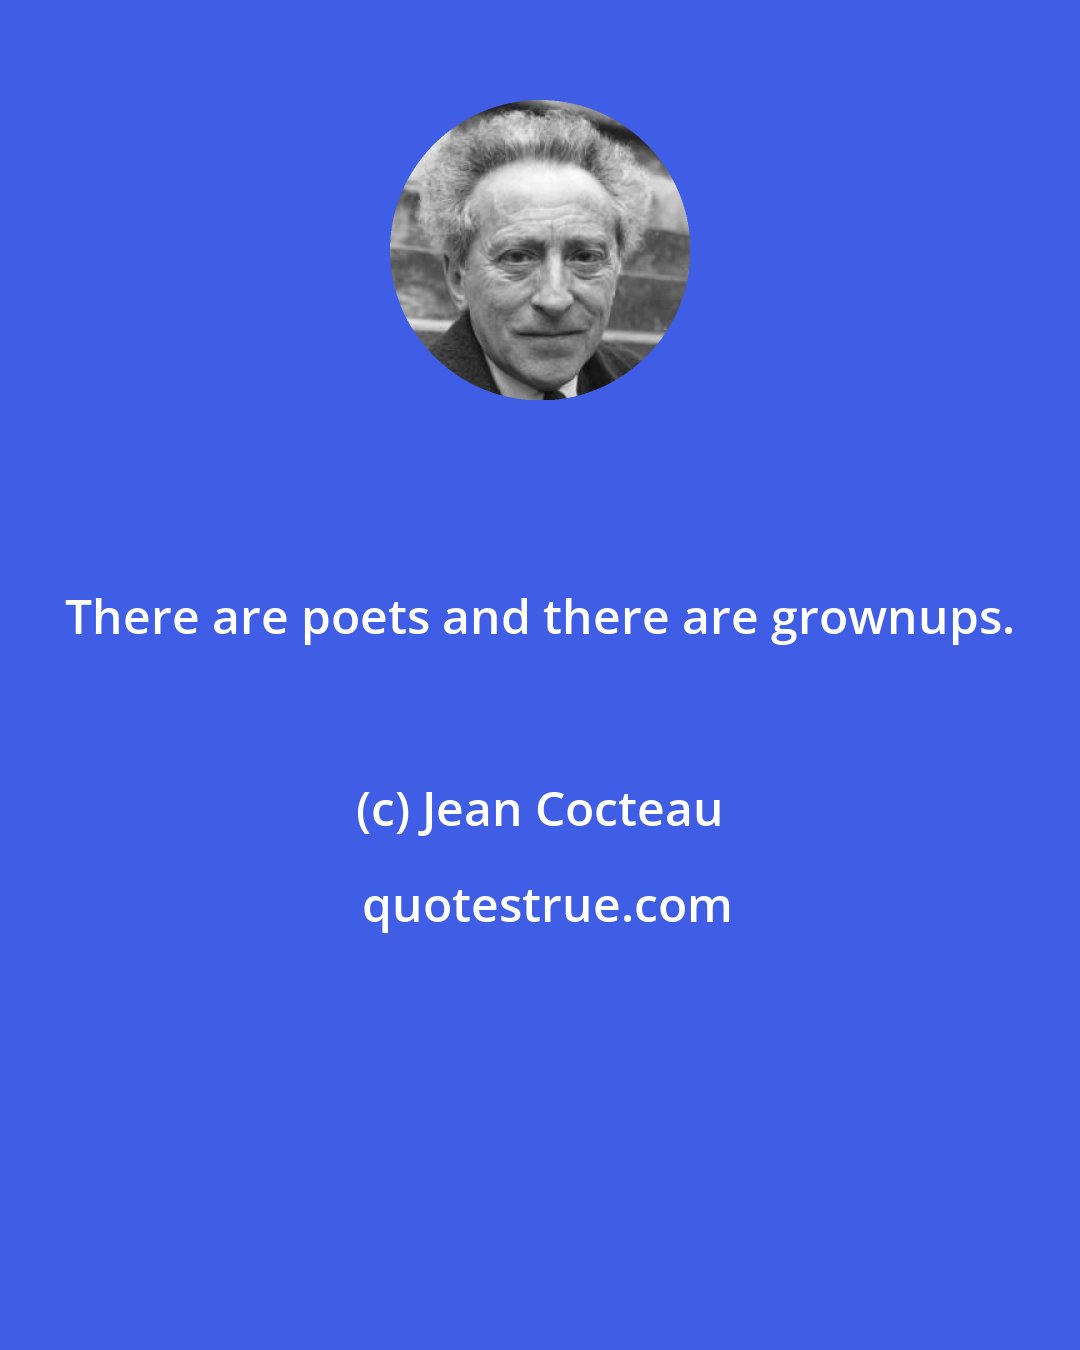 Jean Cocteau: There are poets and there are grownups.